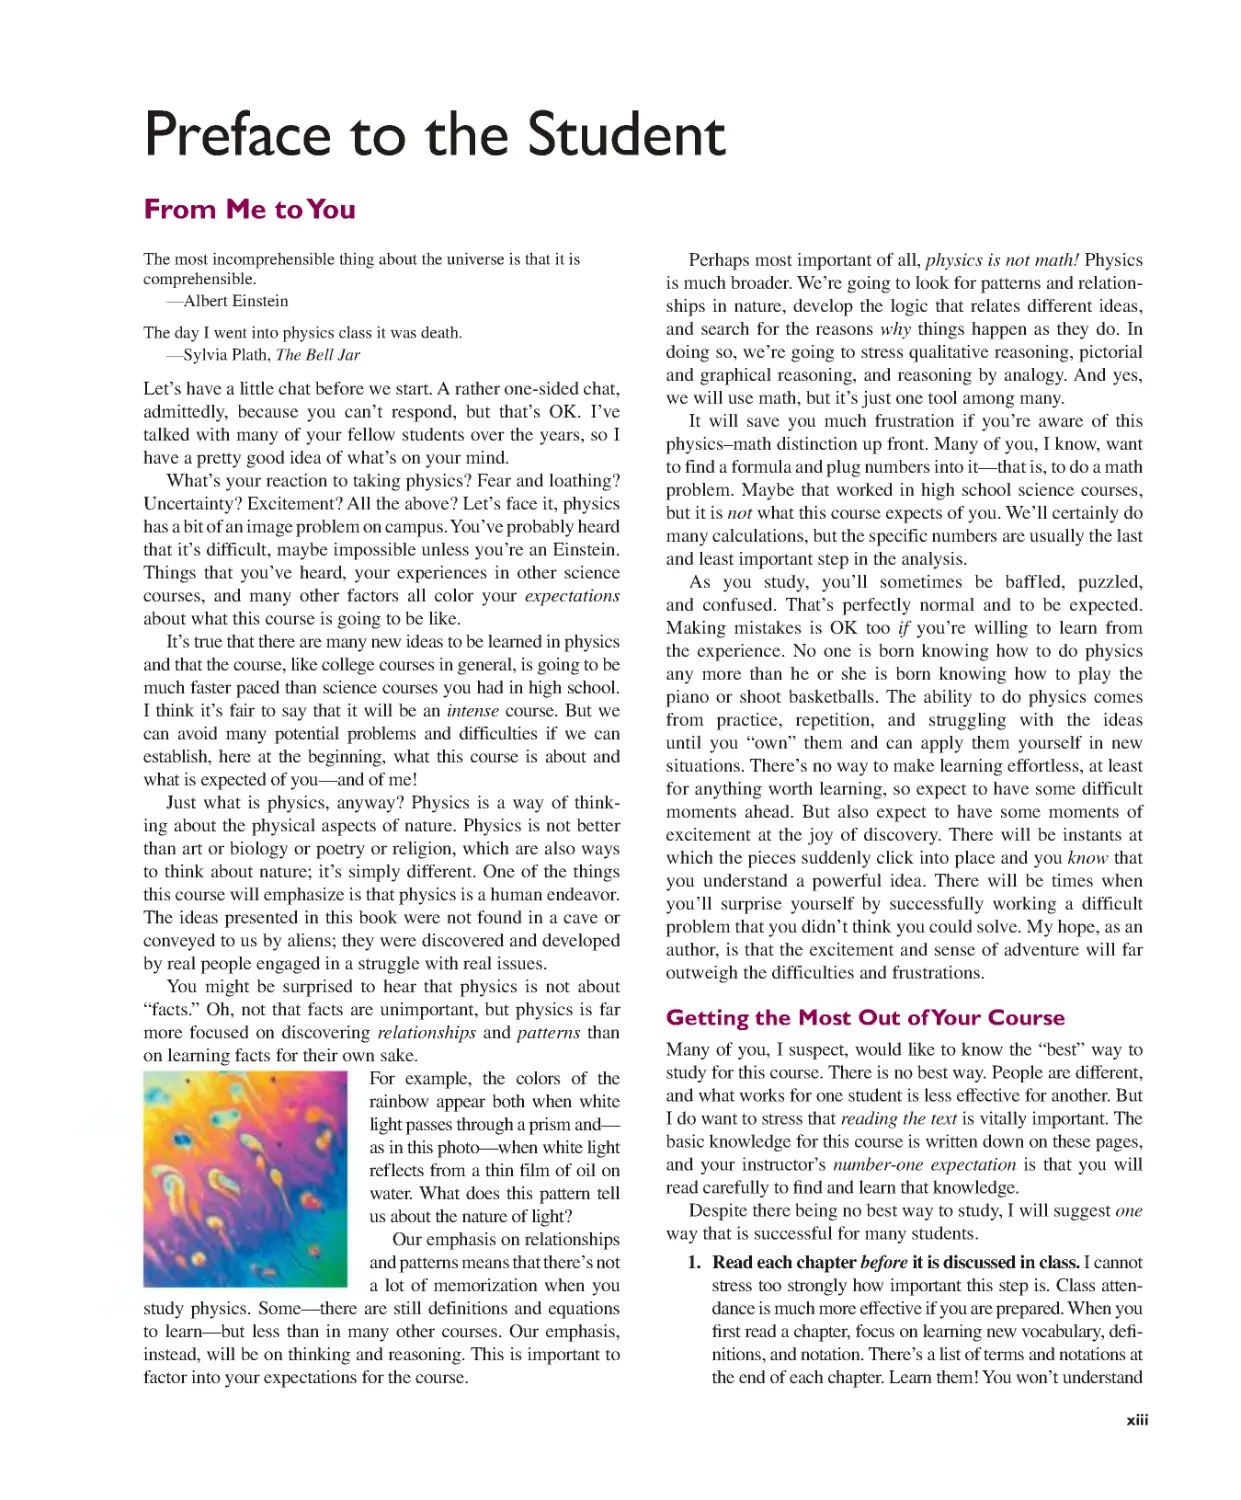 Preface to the Student